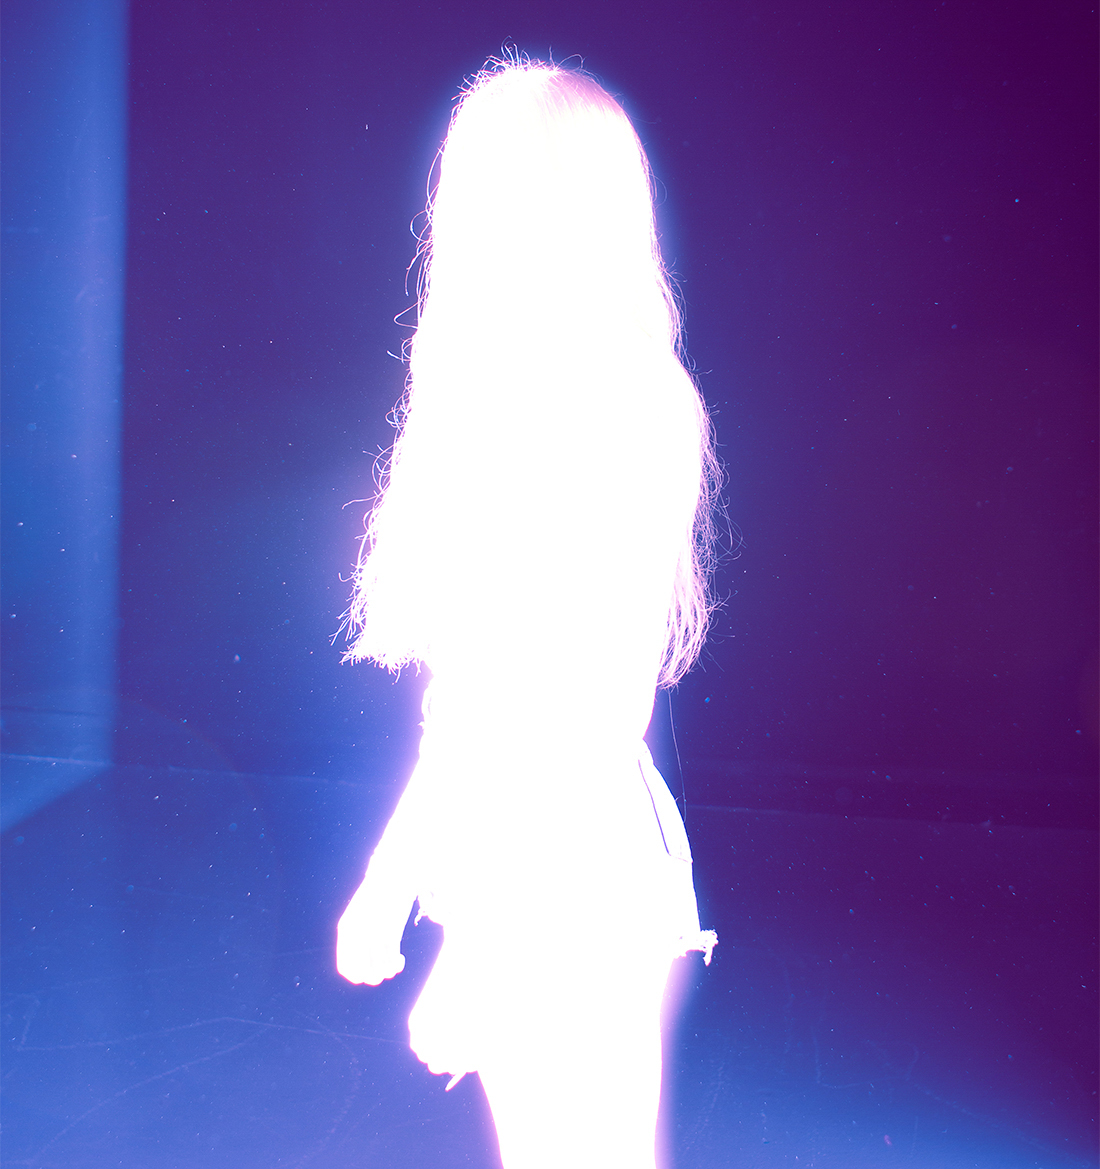 A purple image with a white glowing figure standing still.